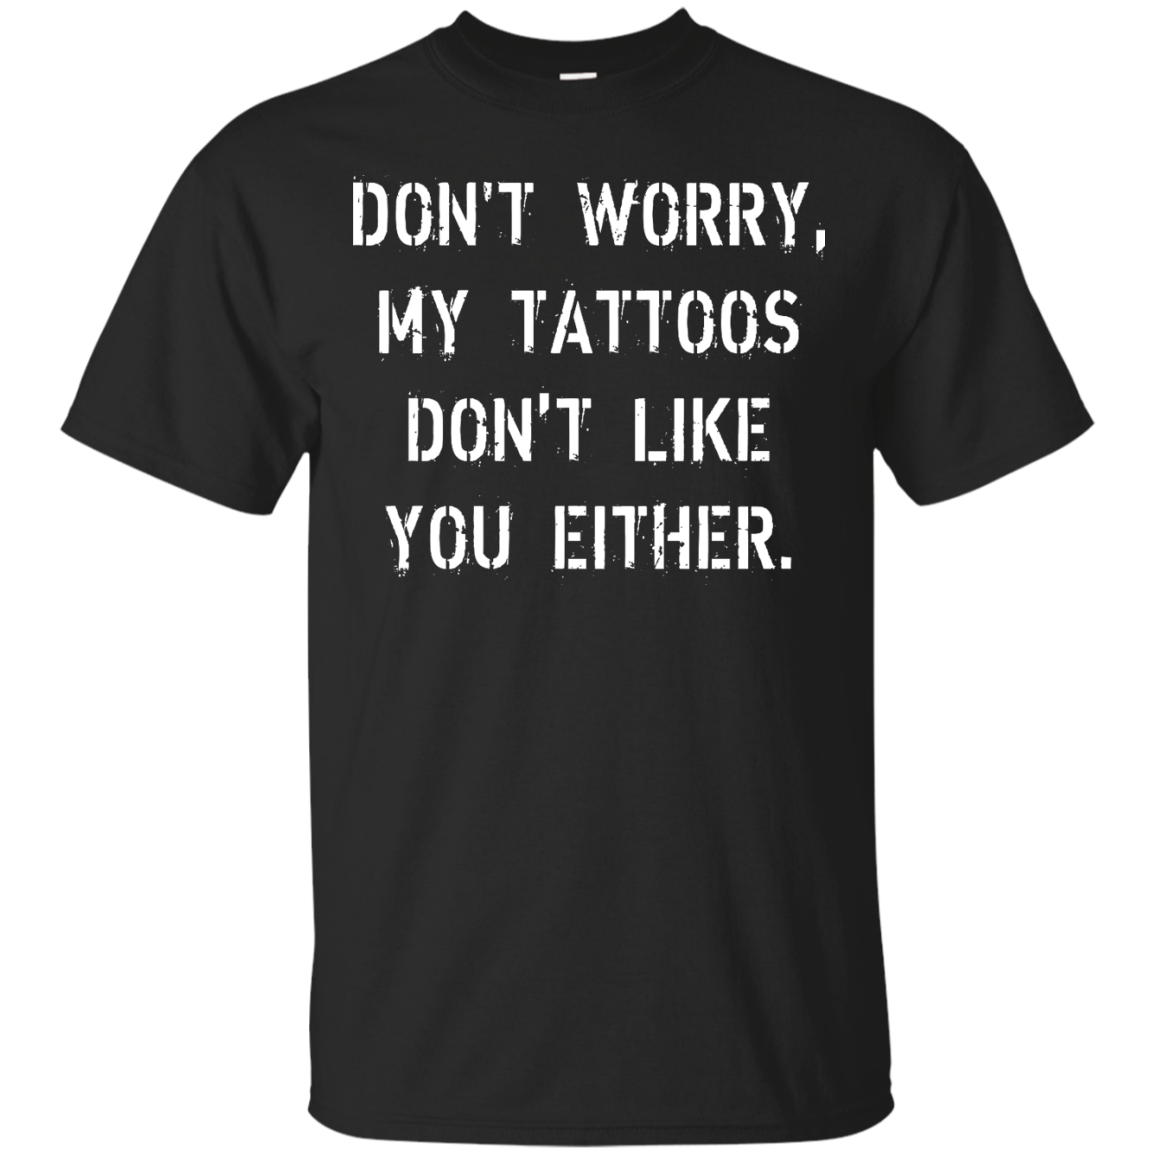 Don't worry, my tattoos don't like you either shirt, sweater